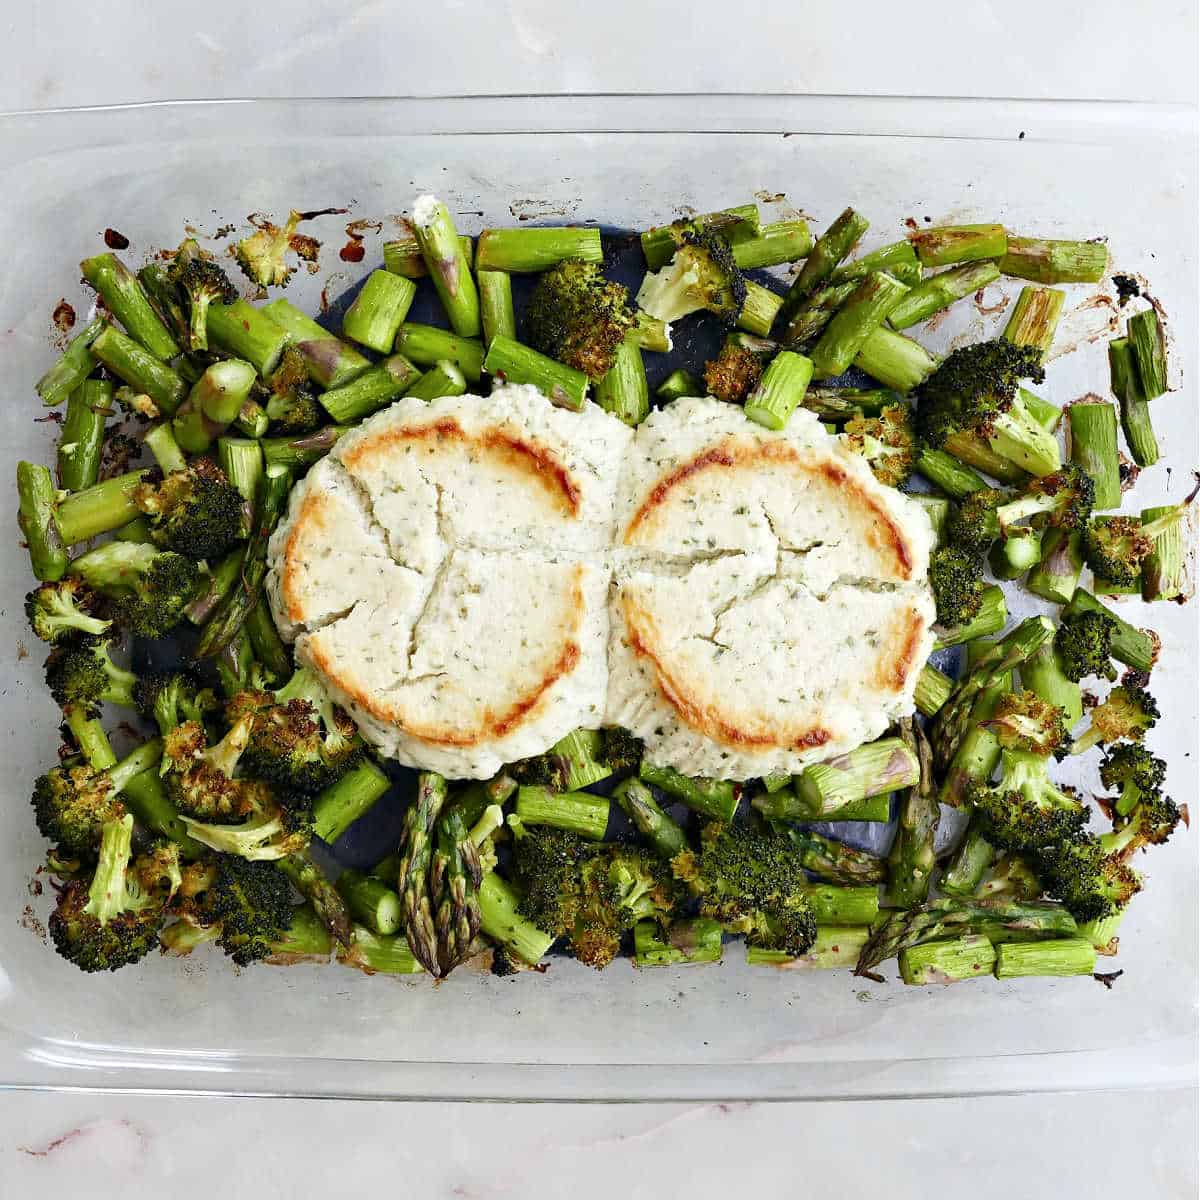 Asparagus and broccoli topped with cheese in a baking dish after baking.